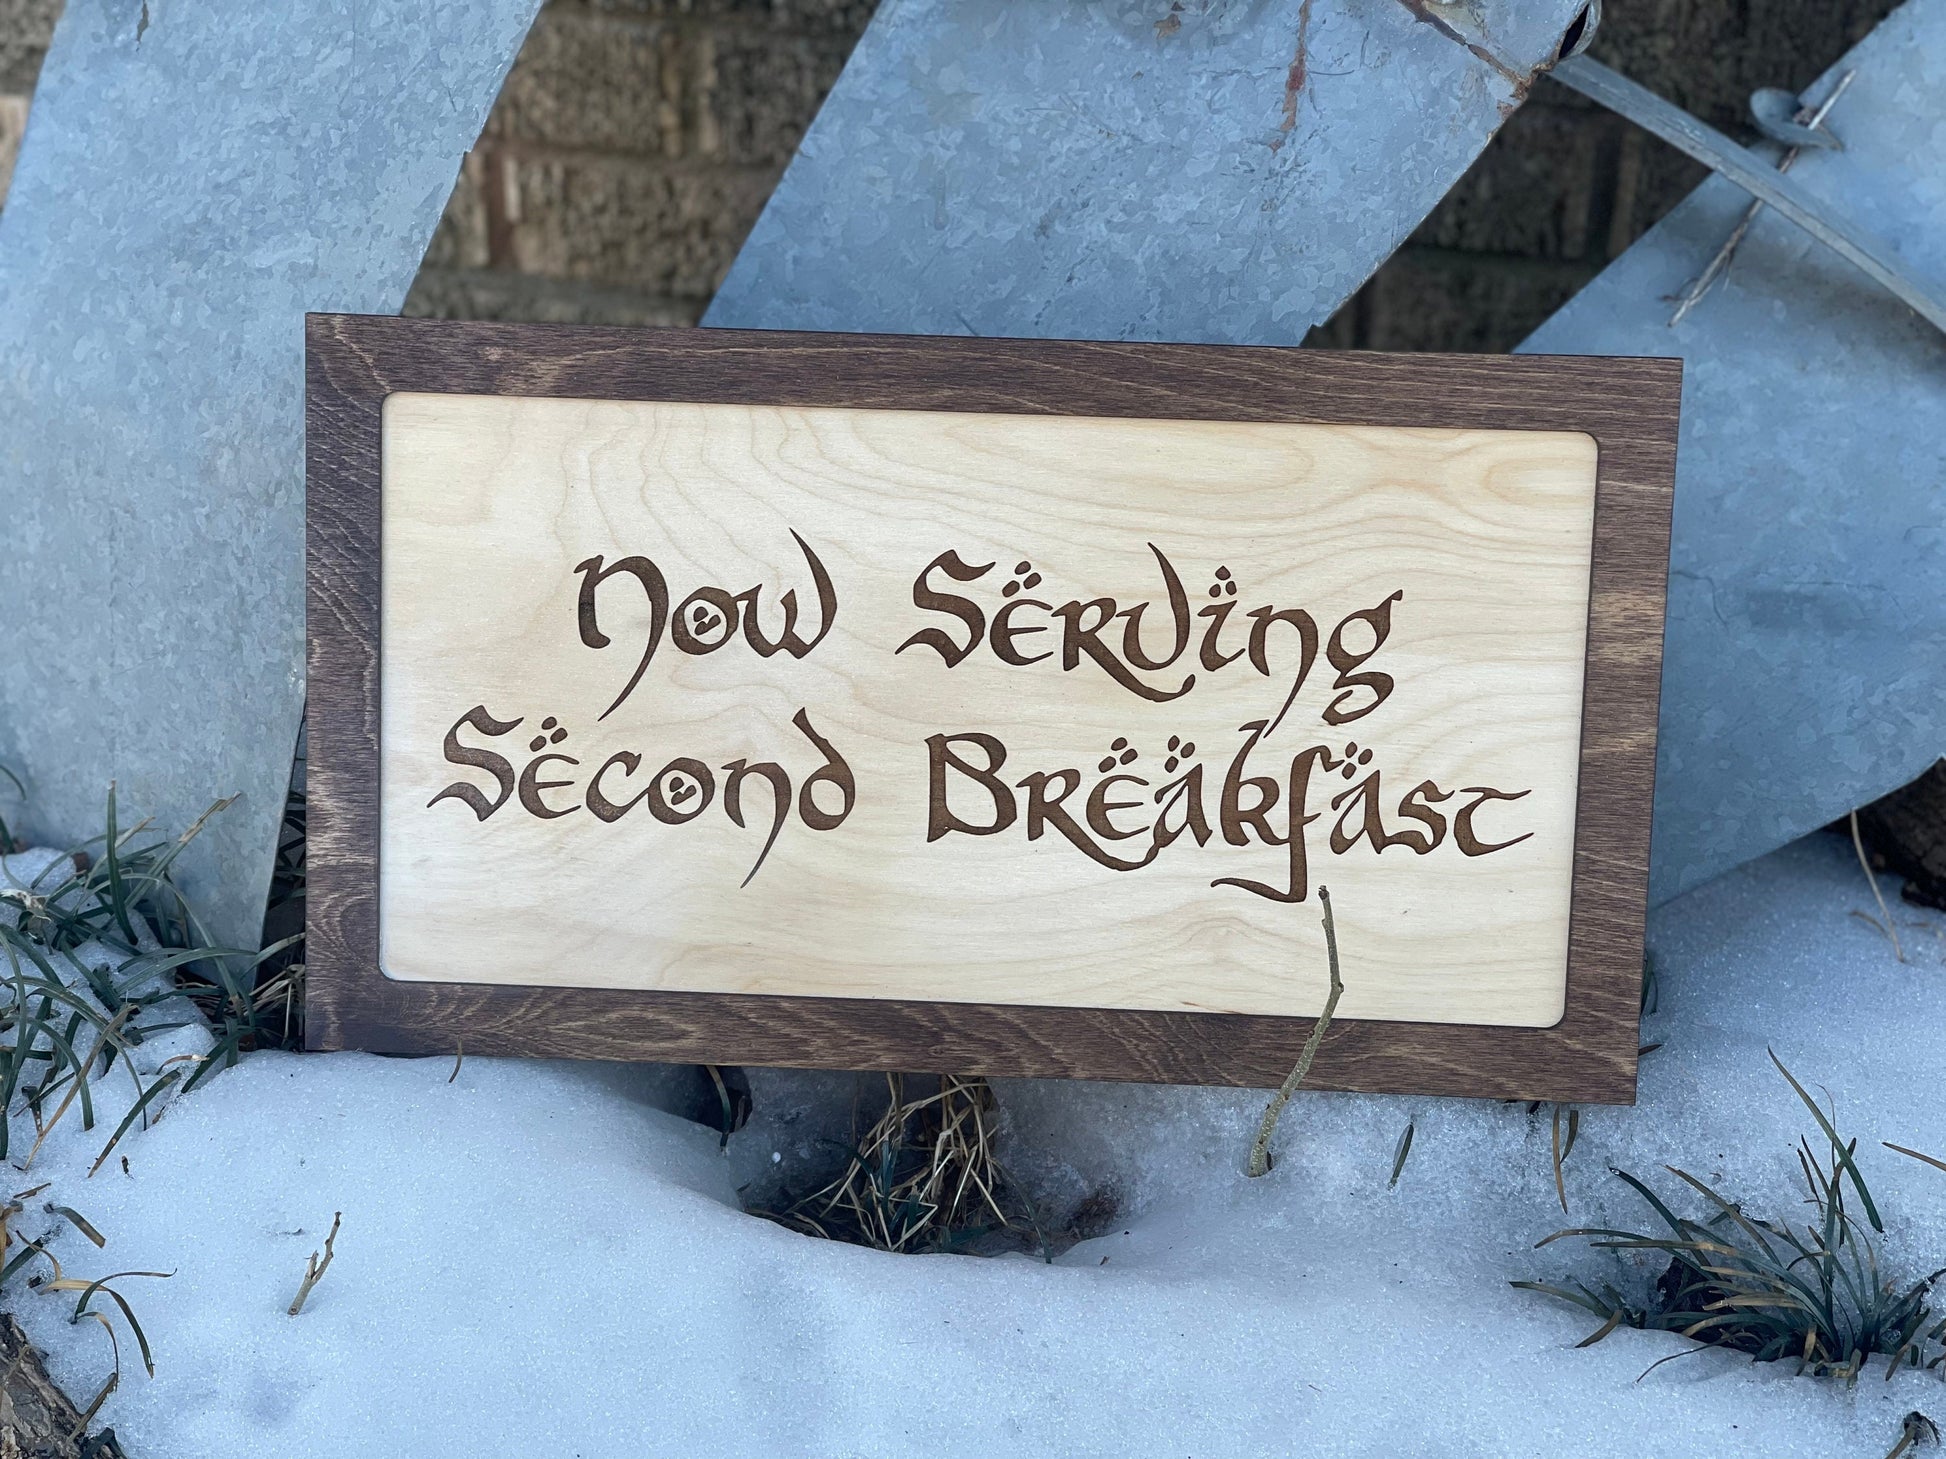 DIY Second Breakfast Hobbit Sign from Lord of the Rings